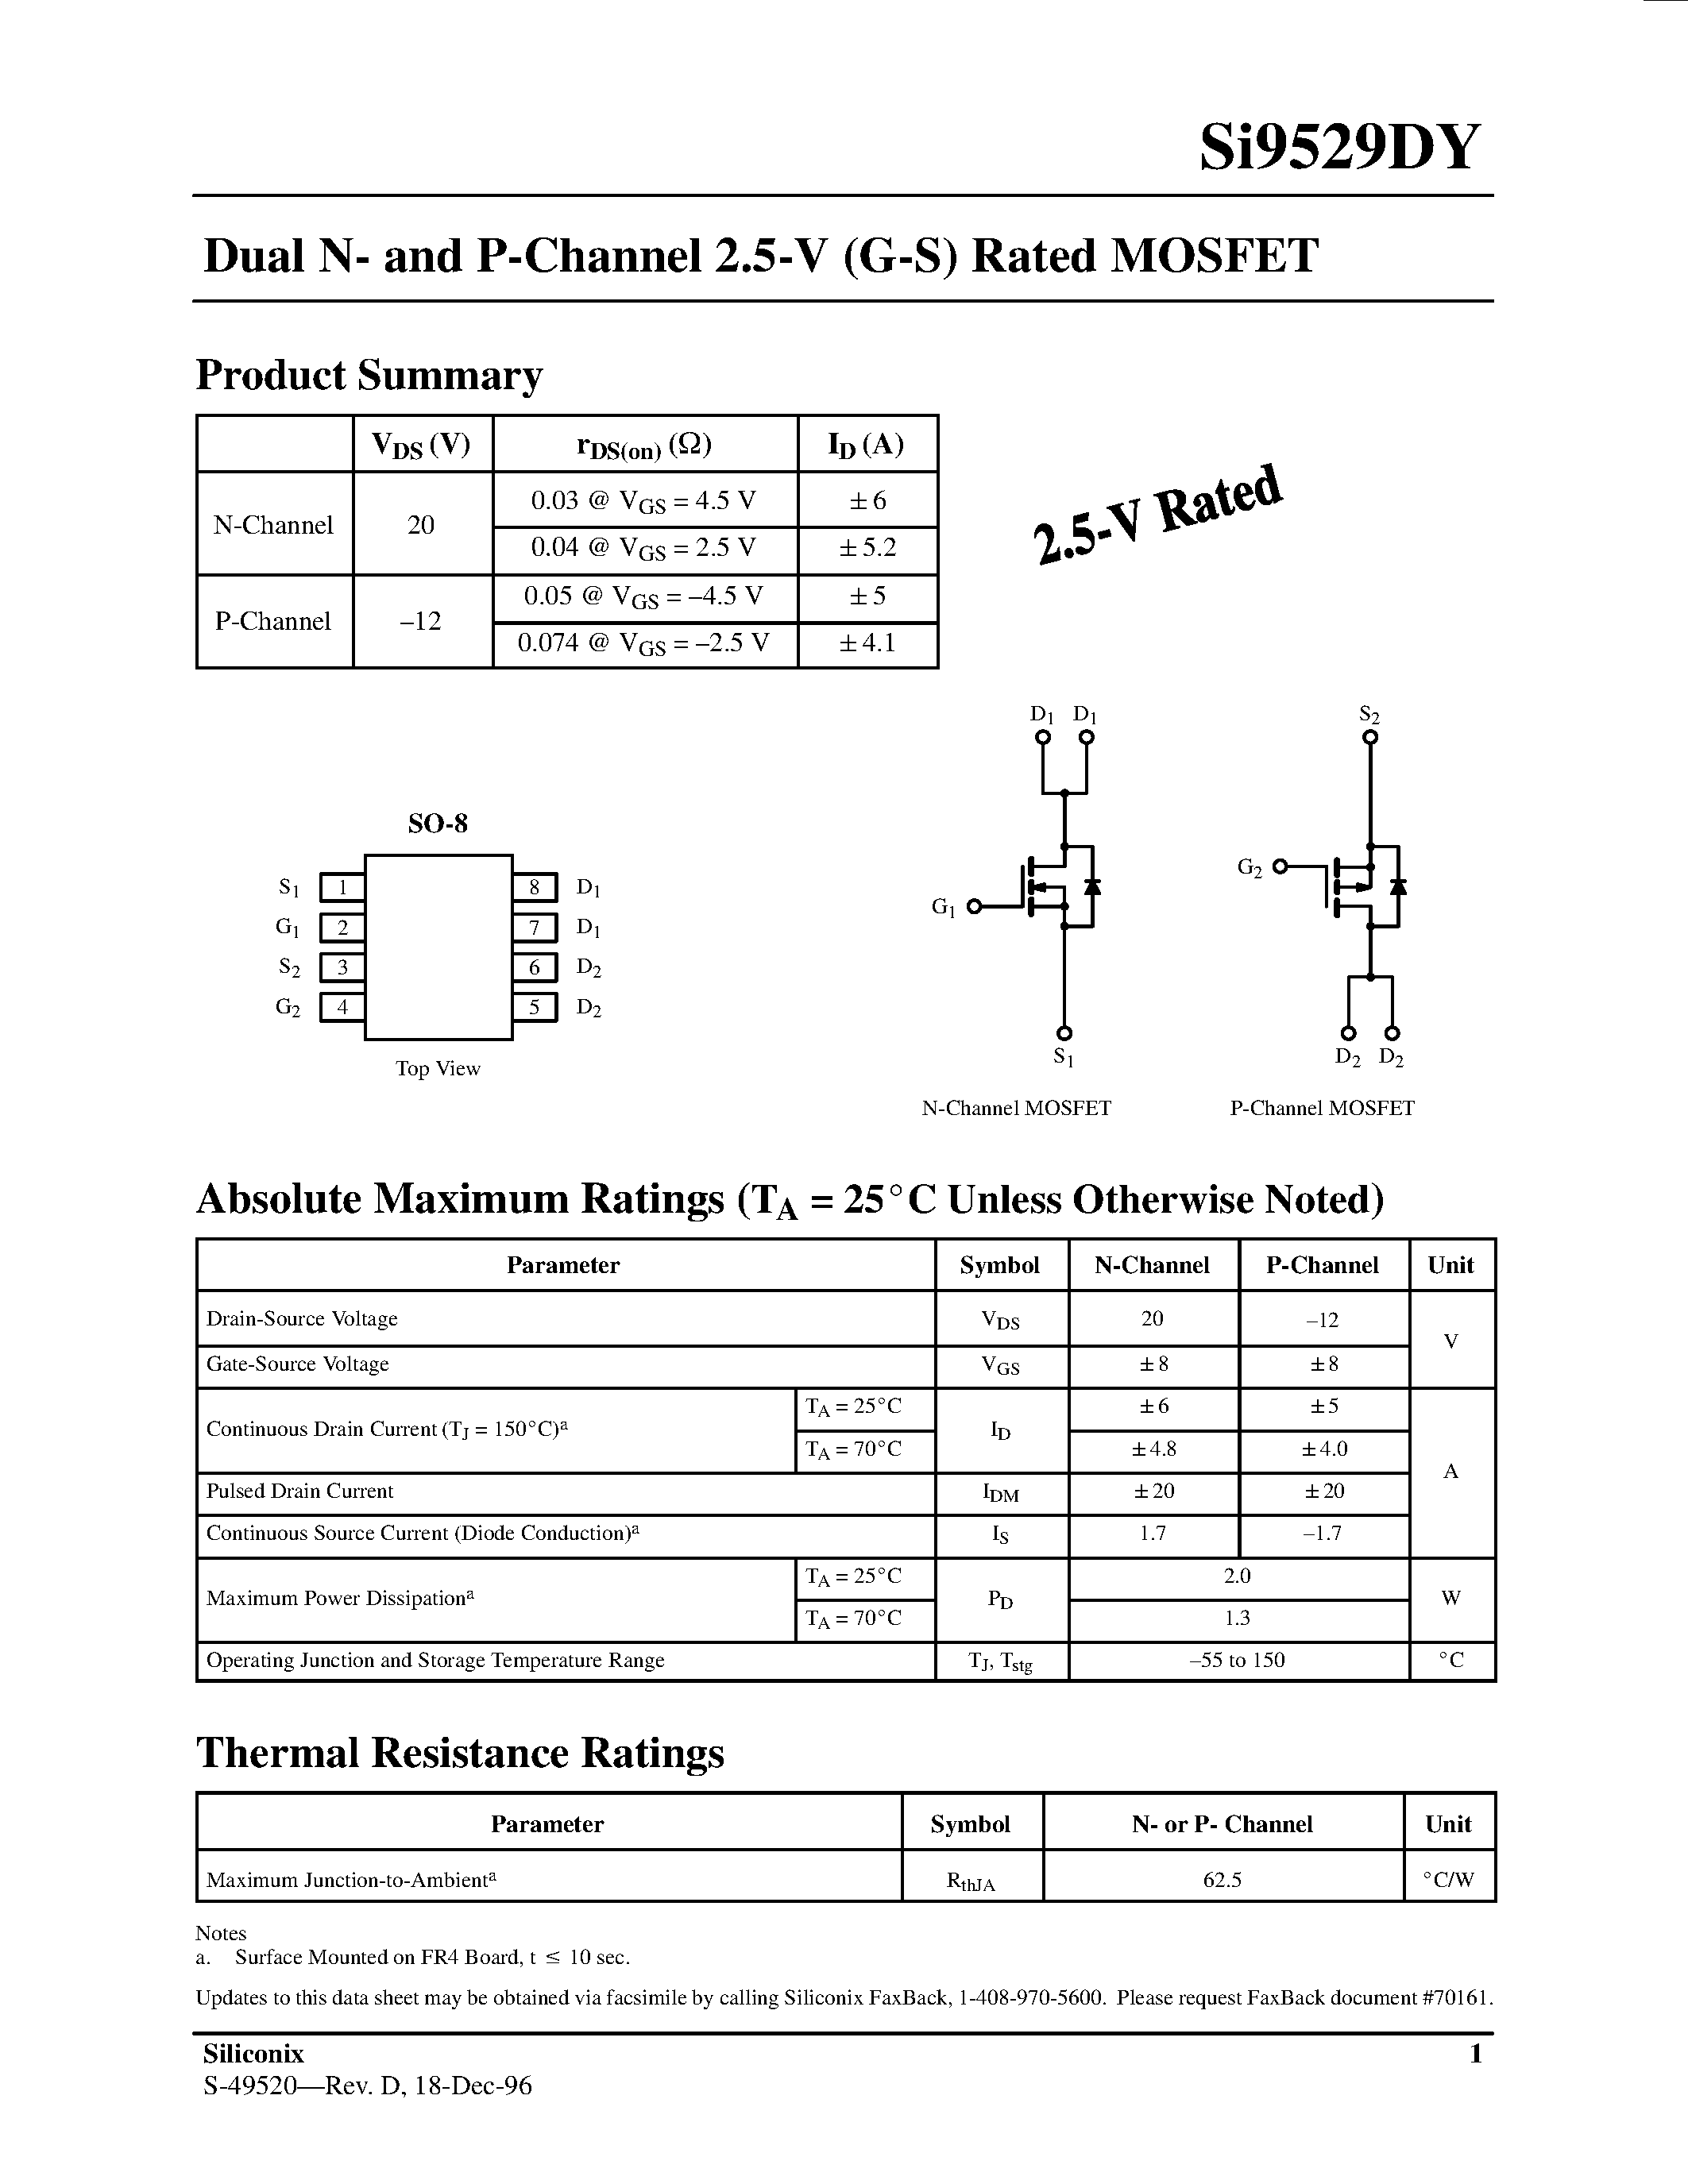 Даташит SI9529DY - Dual N- and P-Channel 2.5-V (G-S) Rated MOSFET страница 1